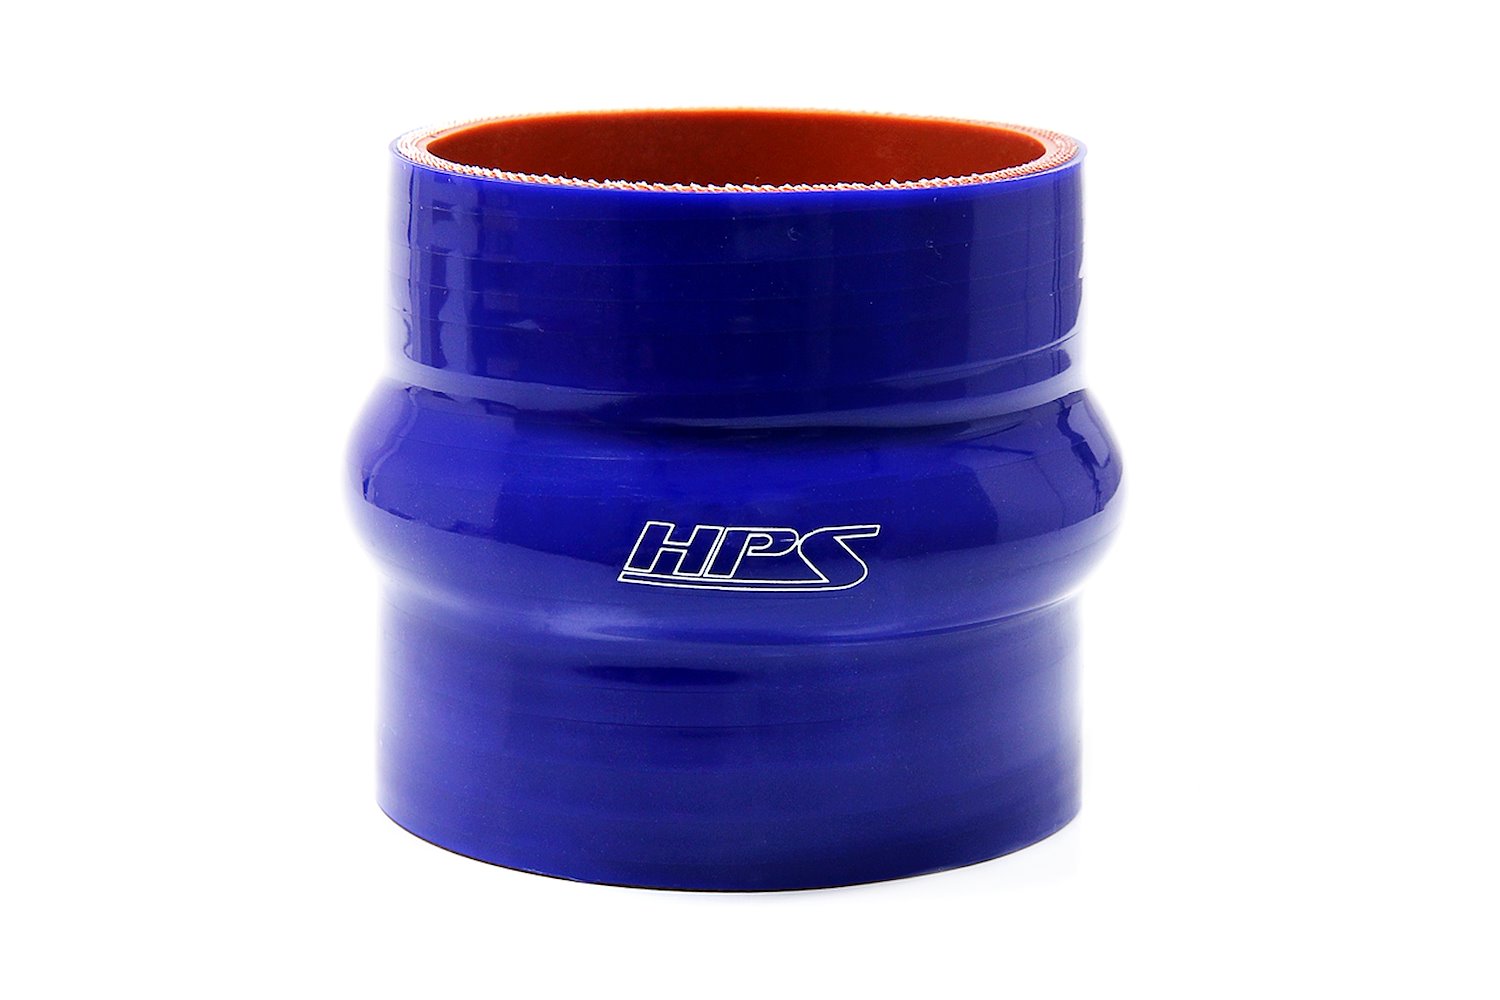 HTSHC-162-BLUE Silicone Hump Coupler Hose, High-Temp 4-Ply Reinforced, 1-5/8 in. ID, 3 in. Long, Blue